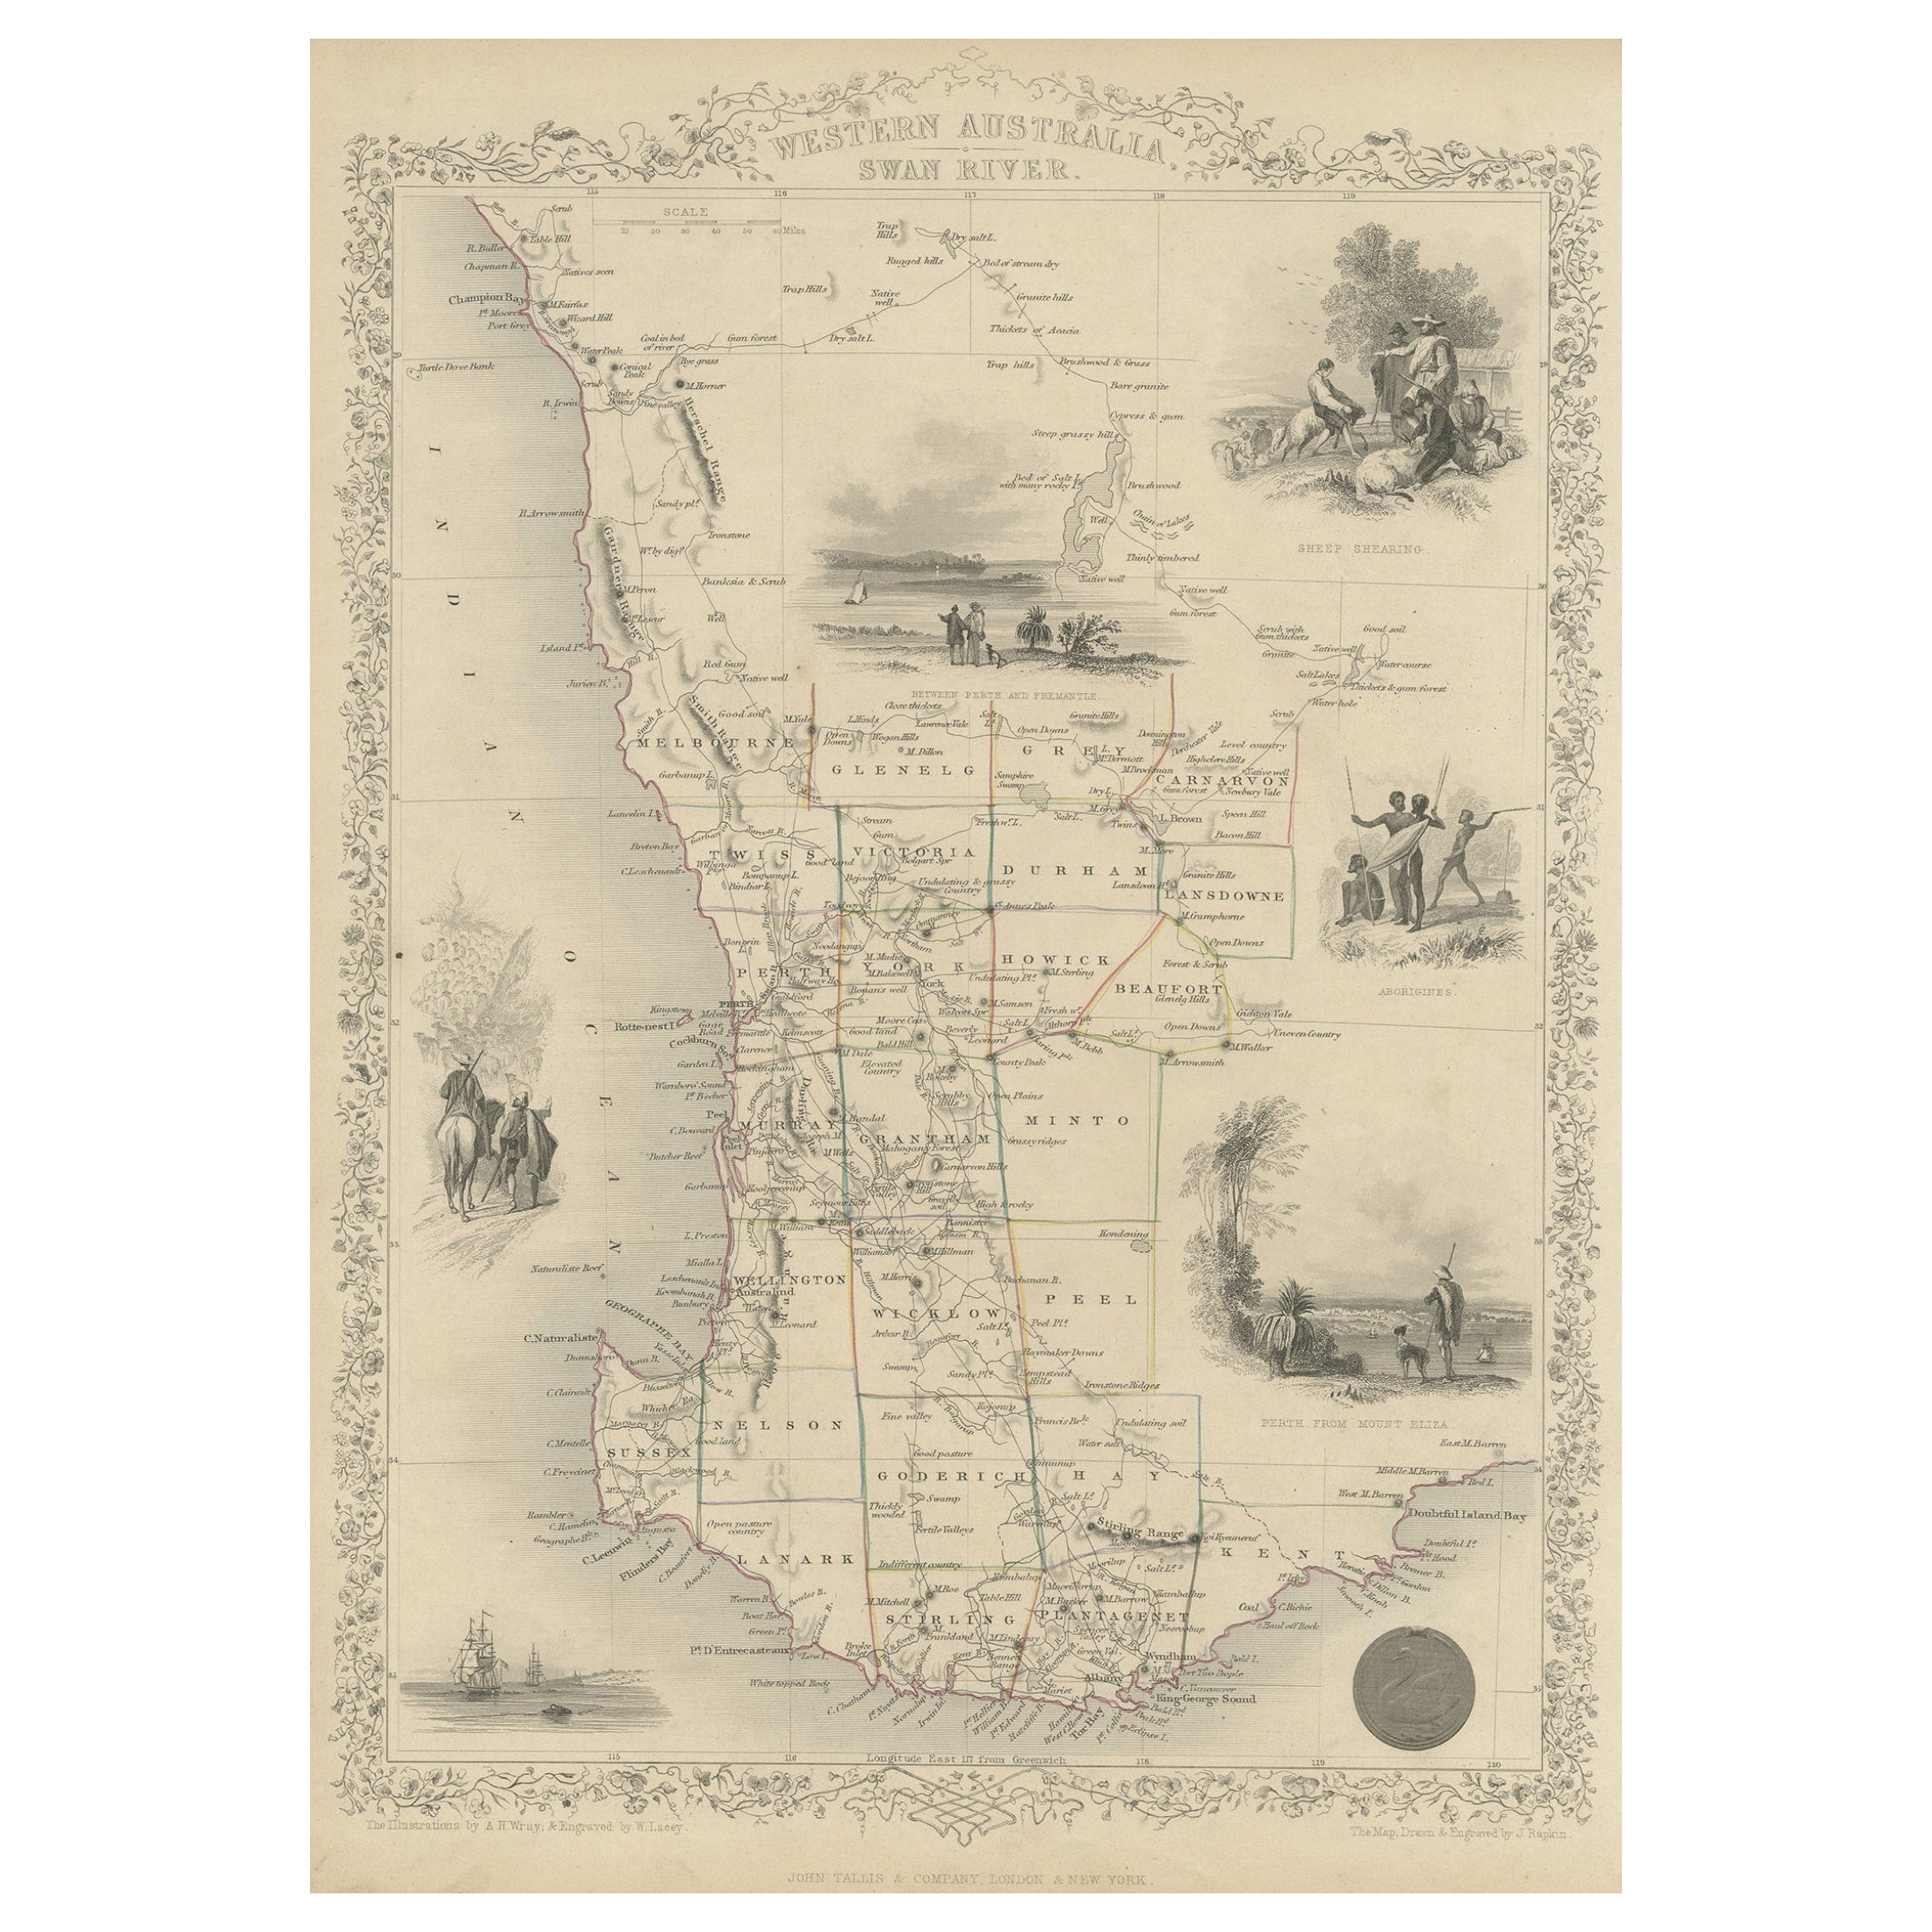 Map of Western Australia & Swan River, insets of Perth, Aboriginals, Sheep, 1851 For Sale